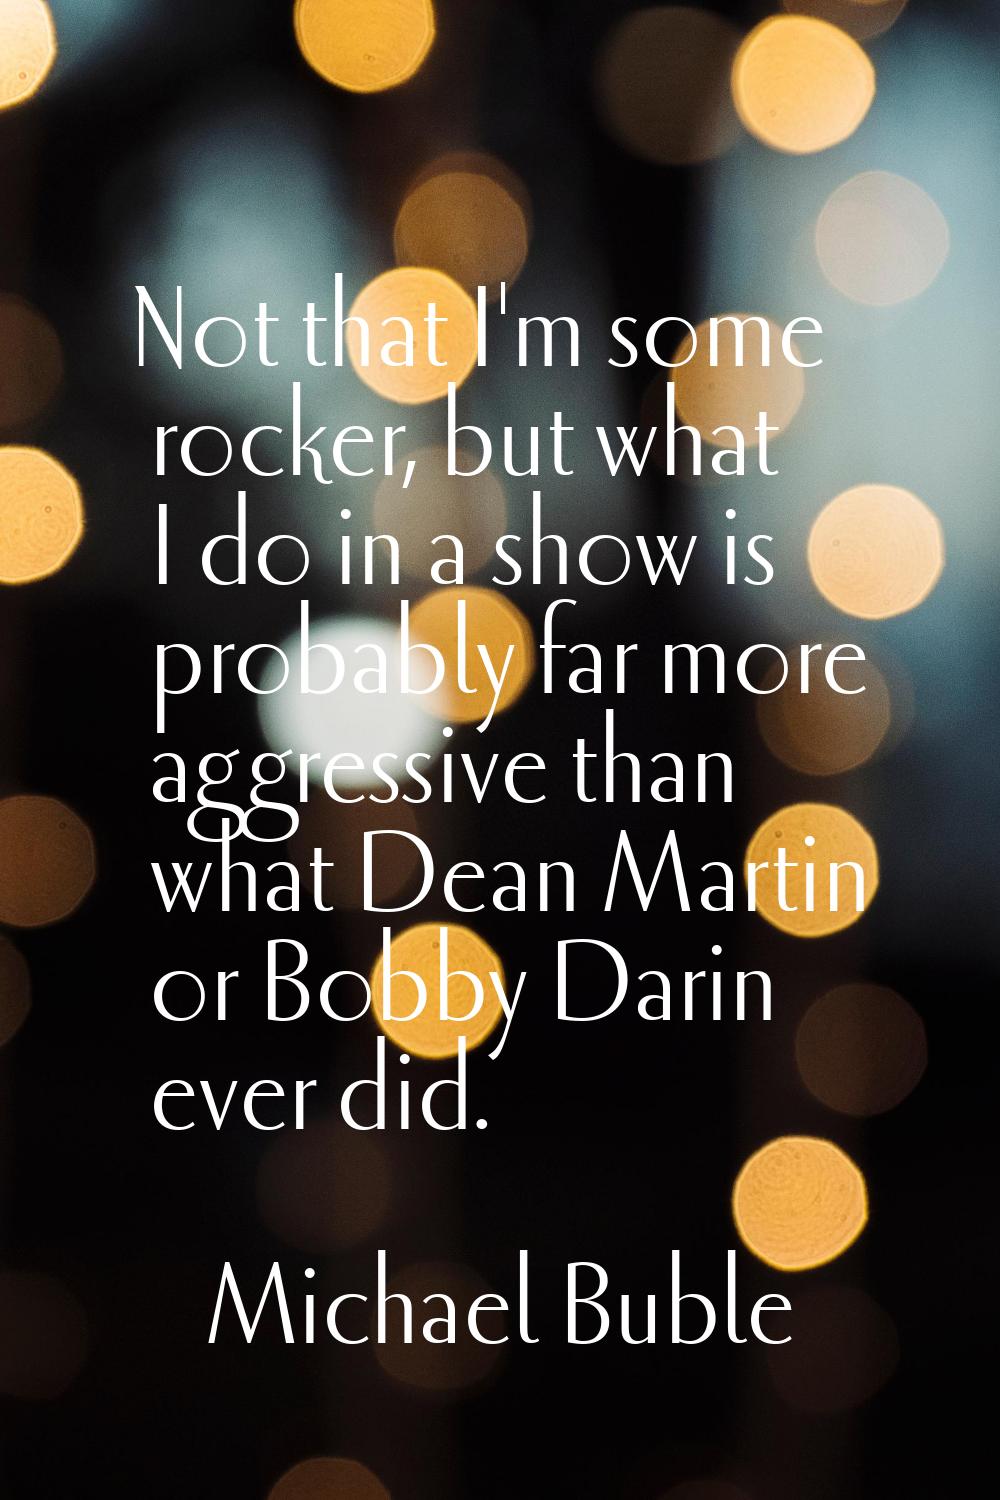 Not that I'm some rocker, but what I do in a show is probably far more aggressive than what Dean Ma